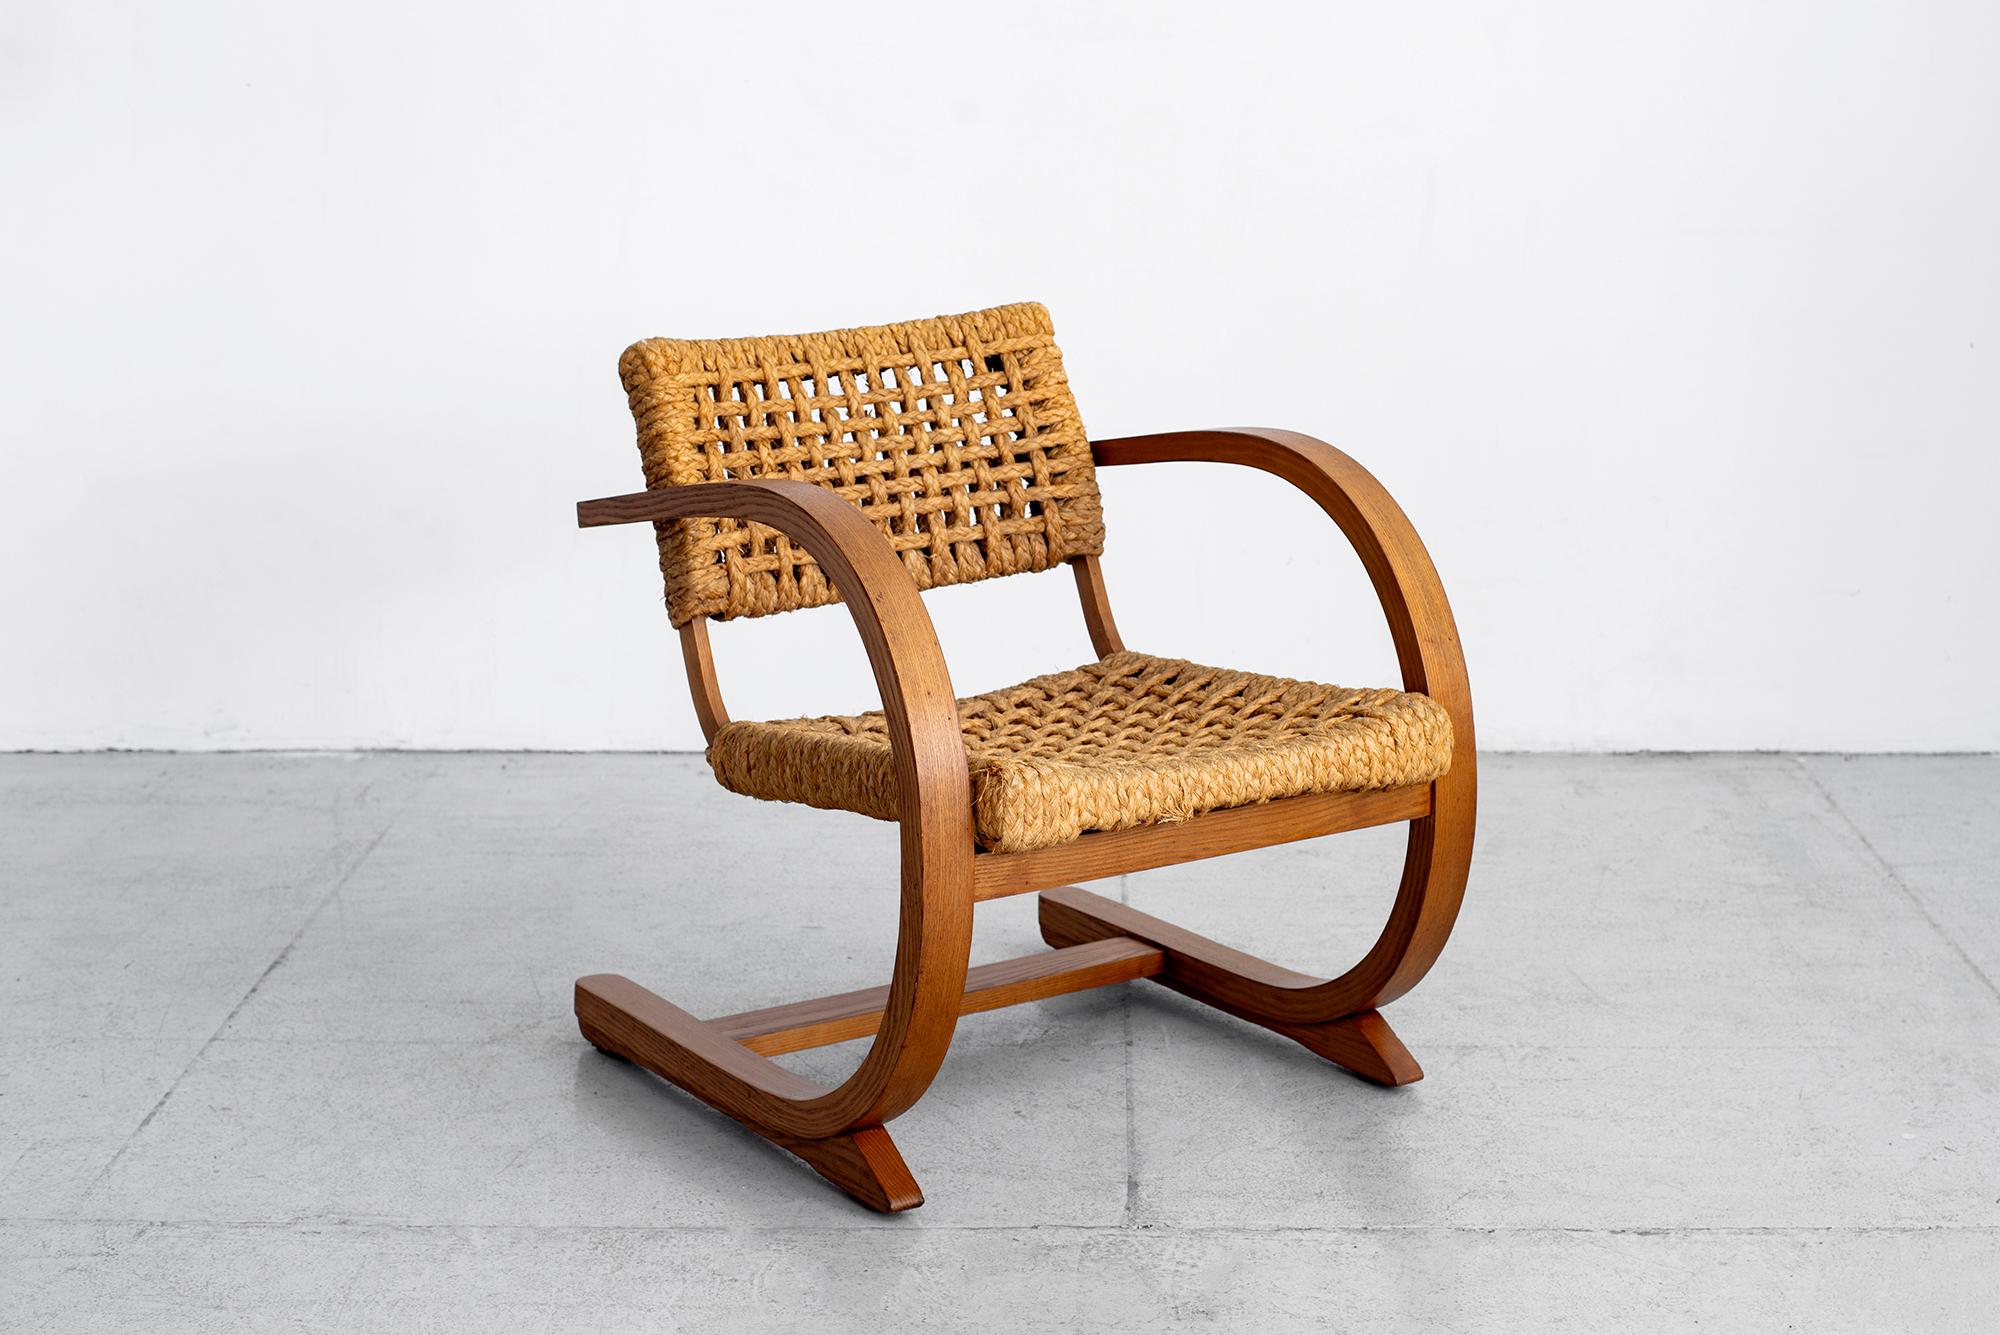 1940s single chair by Paris designer - Adrien Audoux & Frida Minet.
Classic modern French design with rope seats and backs
French oakwood arms with fantastic patina.
   